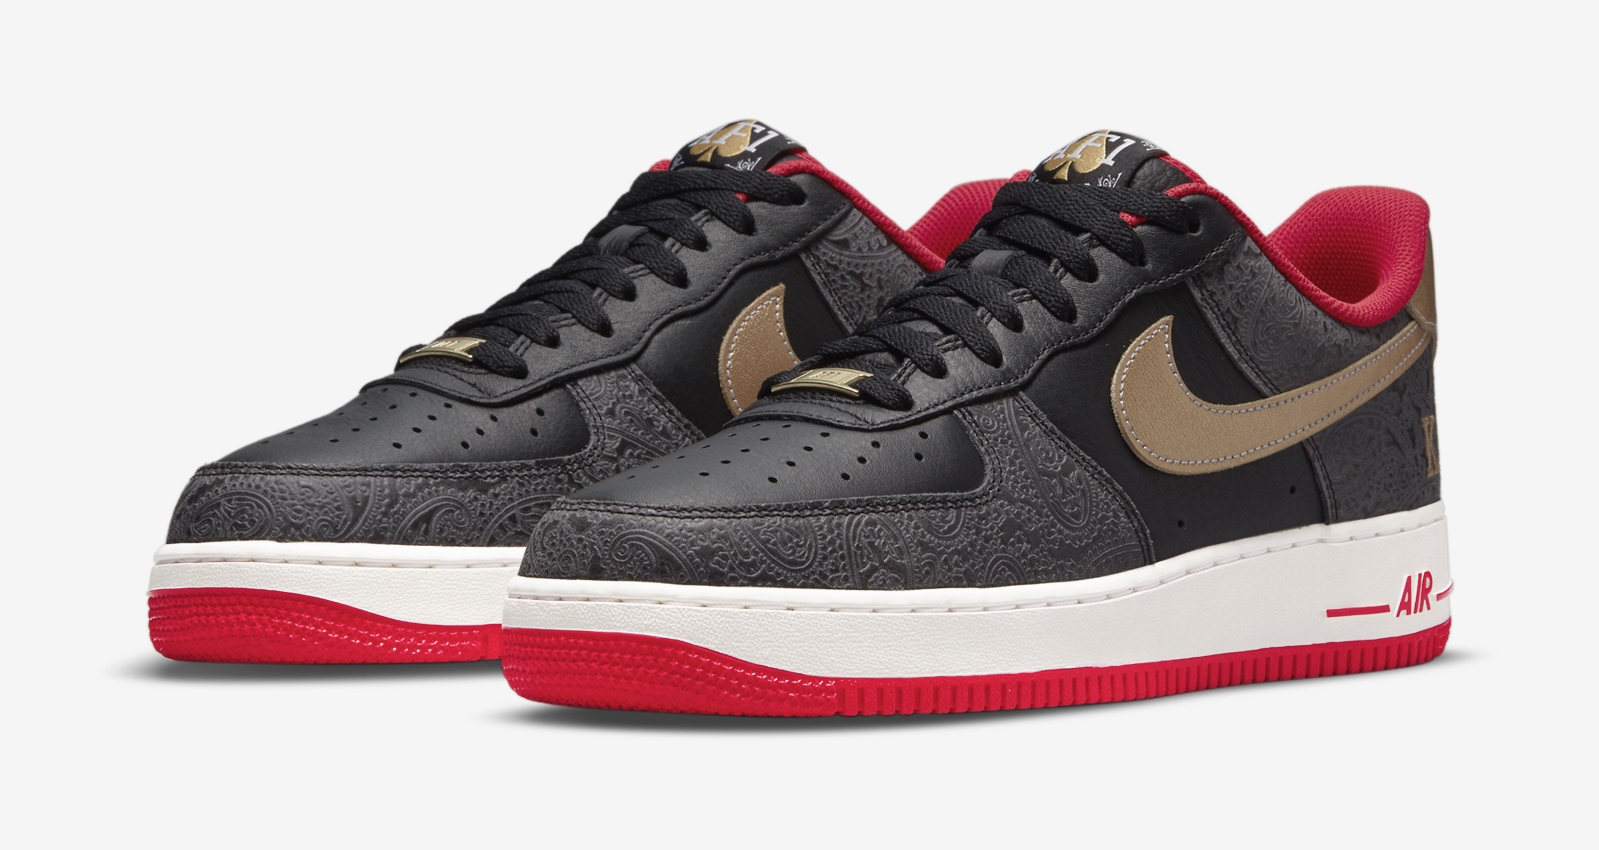 NIKE AIR FORCE 1 LOW DJ5184-001 "KING QUEEN" RELEASE DETAILS